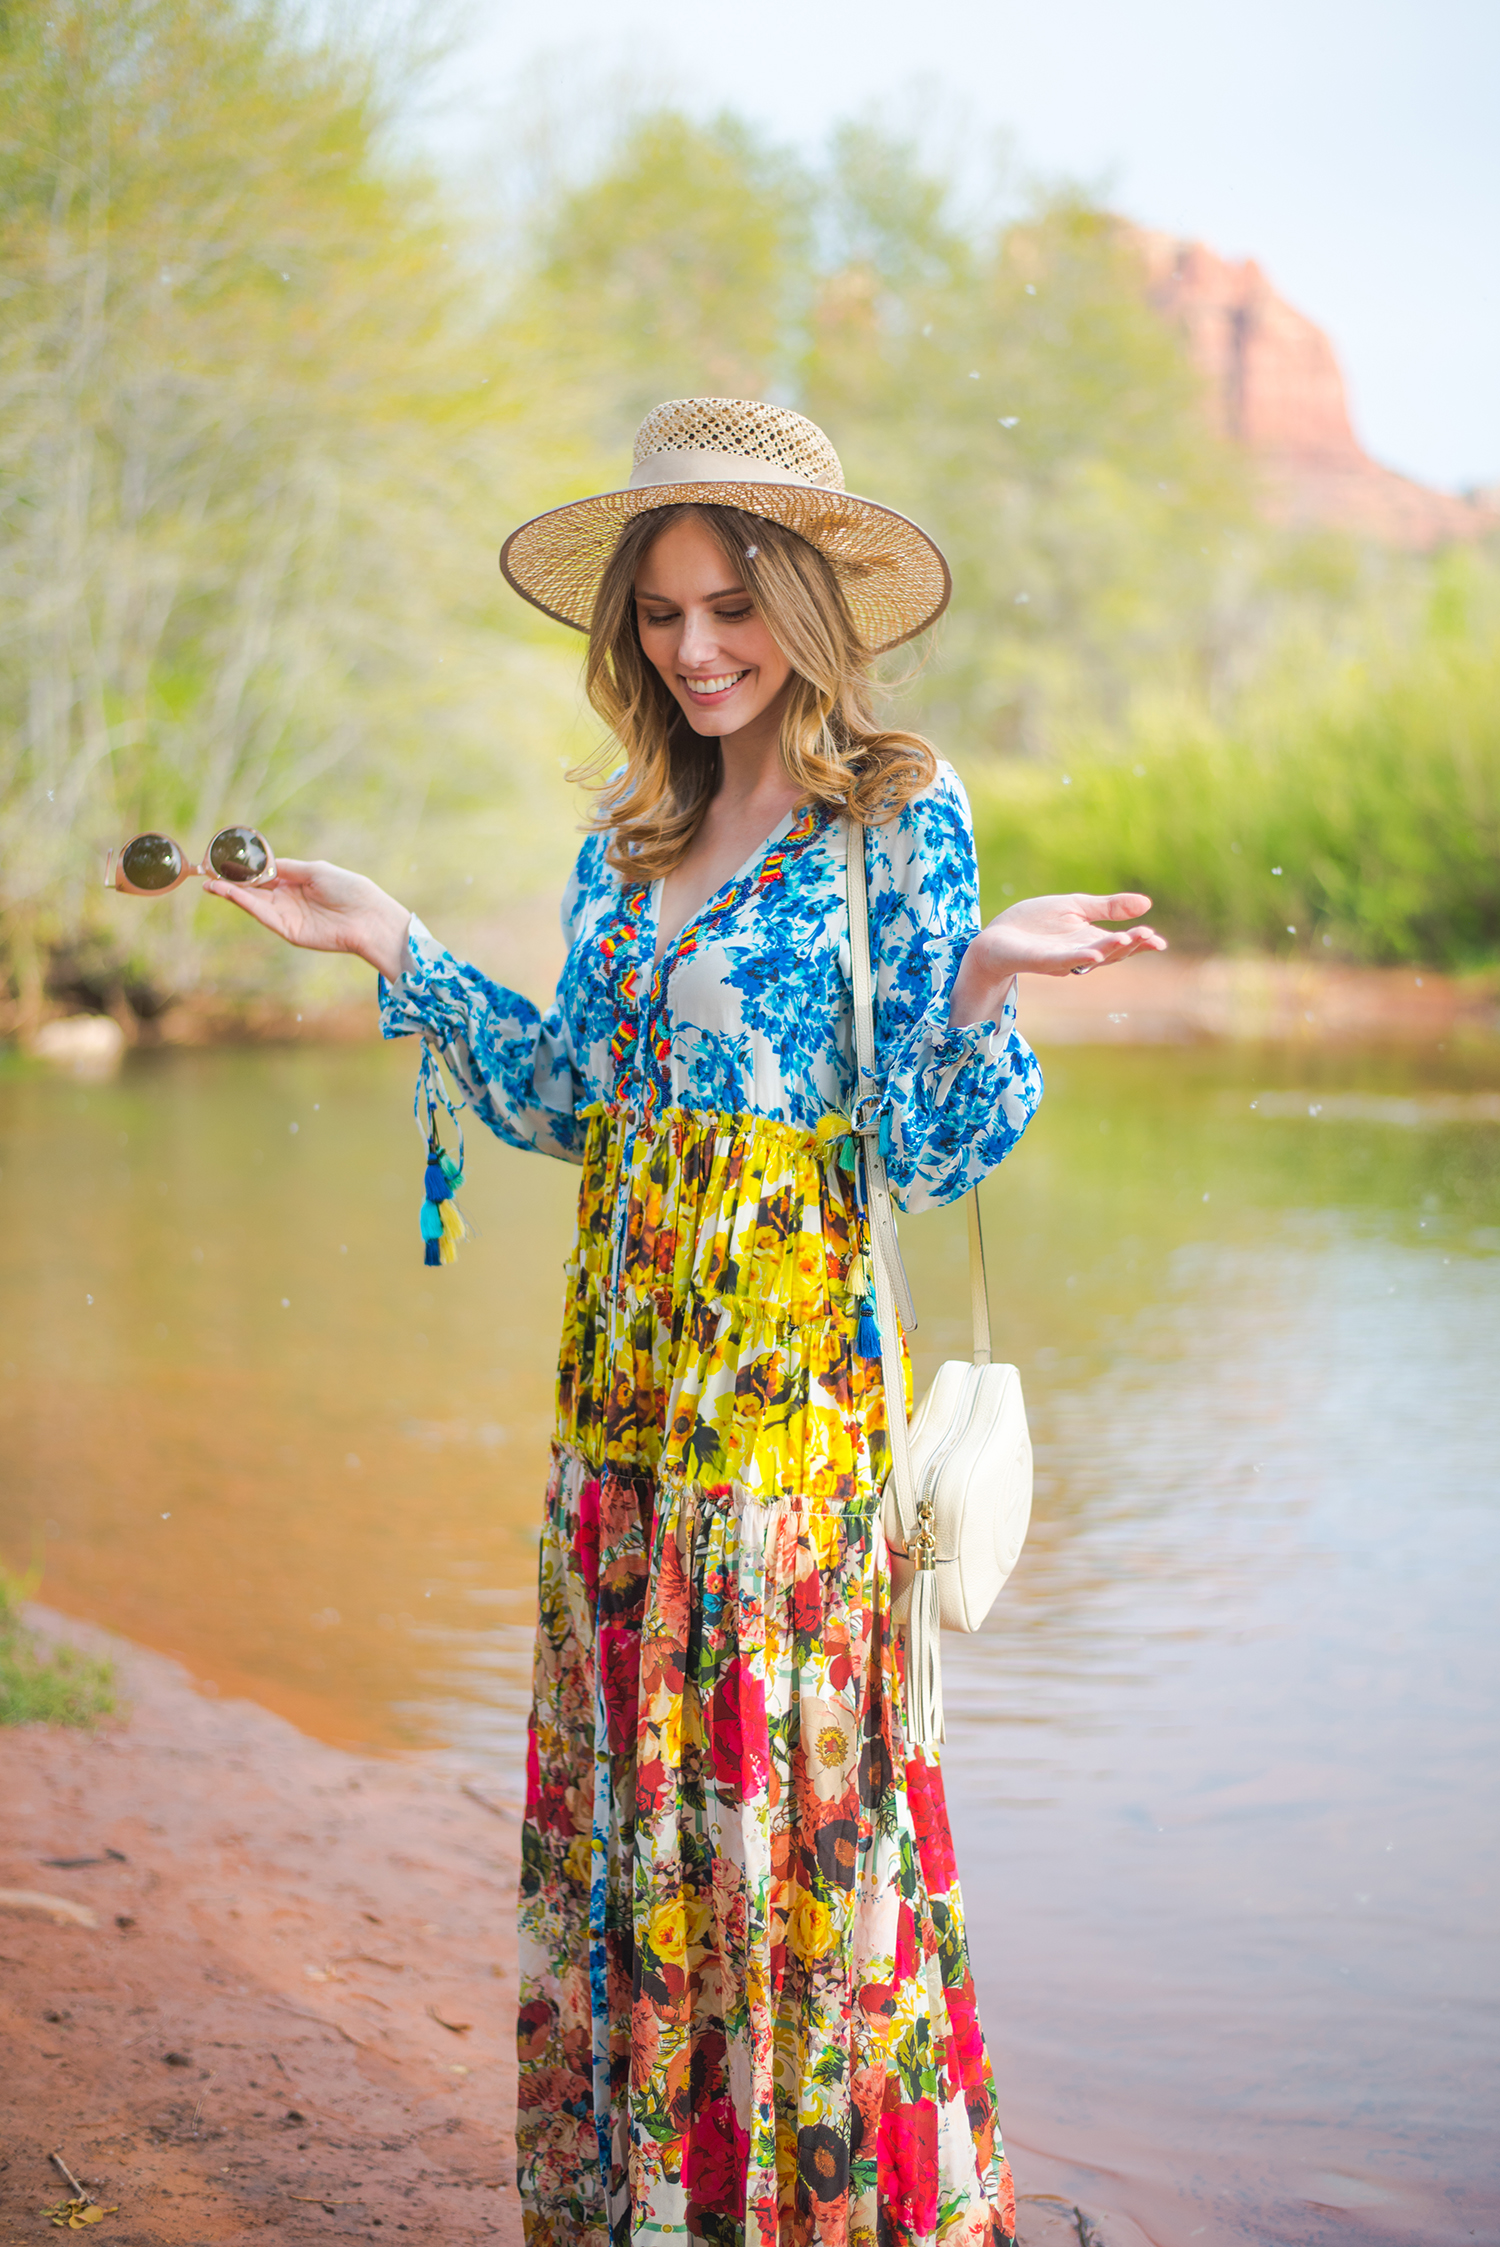 Miss USA 2011 Alyssa Campanella of The A List blog visits Cathedral Rock at Red Rock Crossing in Sedona wearing Rococo Sand Romantic Floral Maxi dress